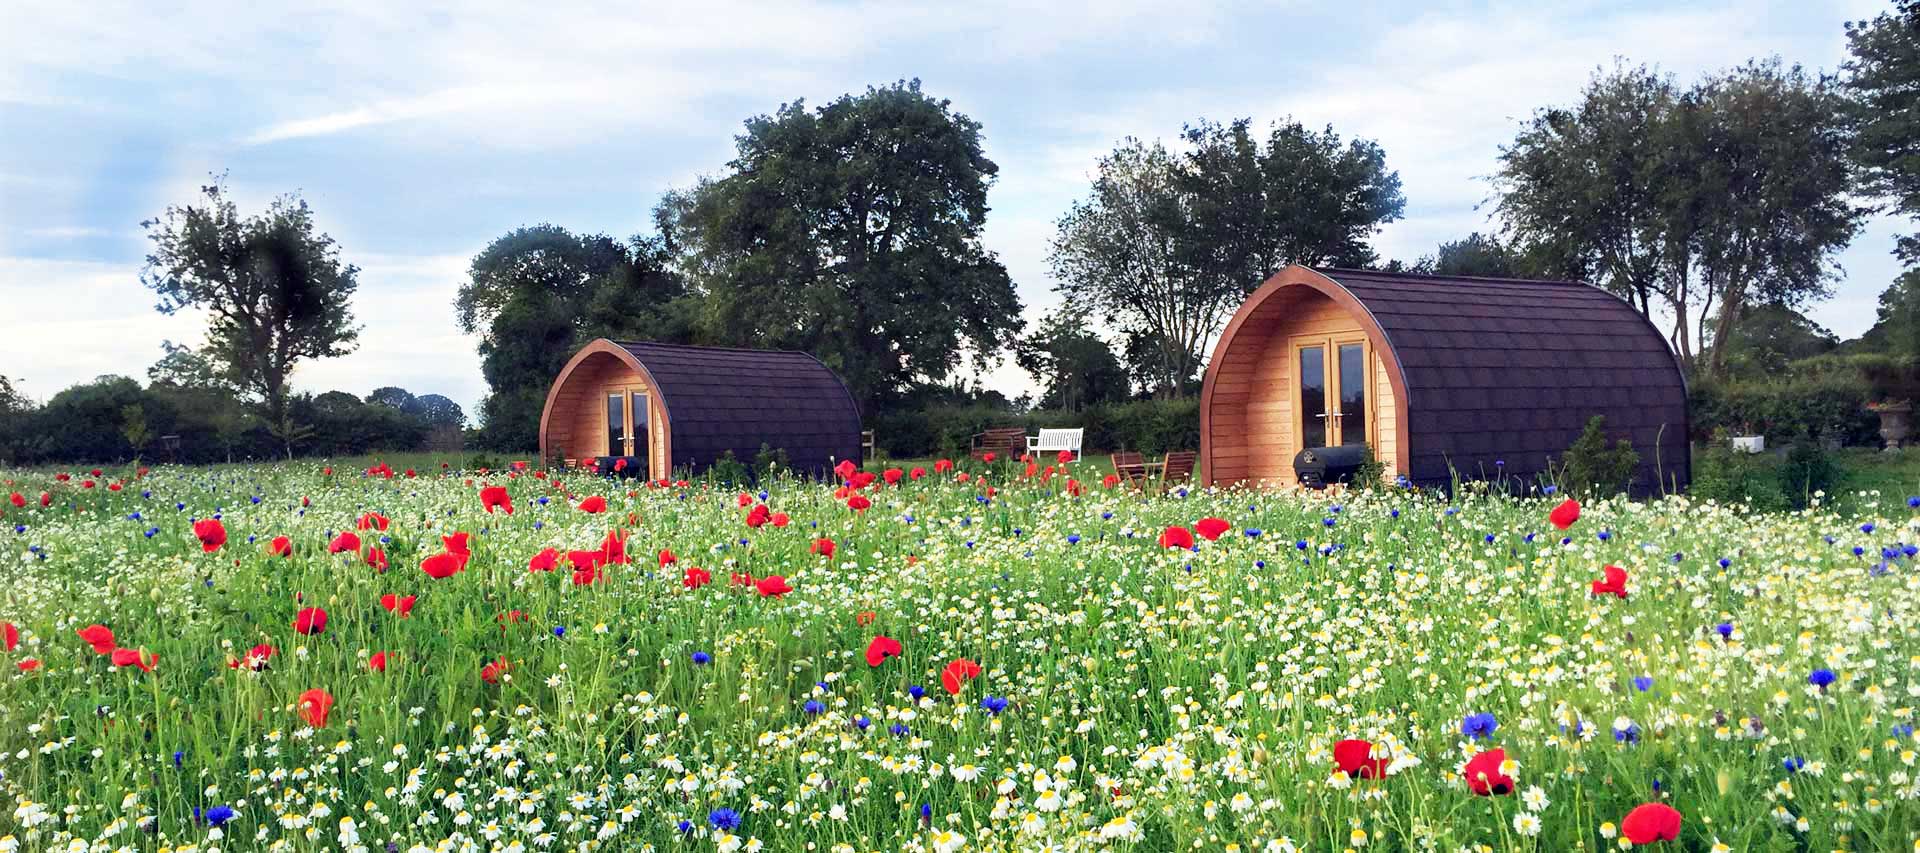 Glamping Pods at Bradley Hall Rural Escapes - Luxurious Glamping Pods on a working farm in Cheshire